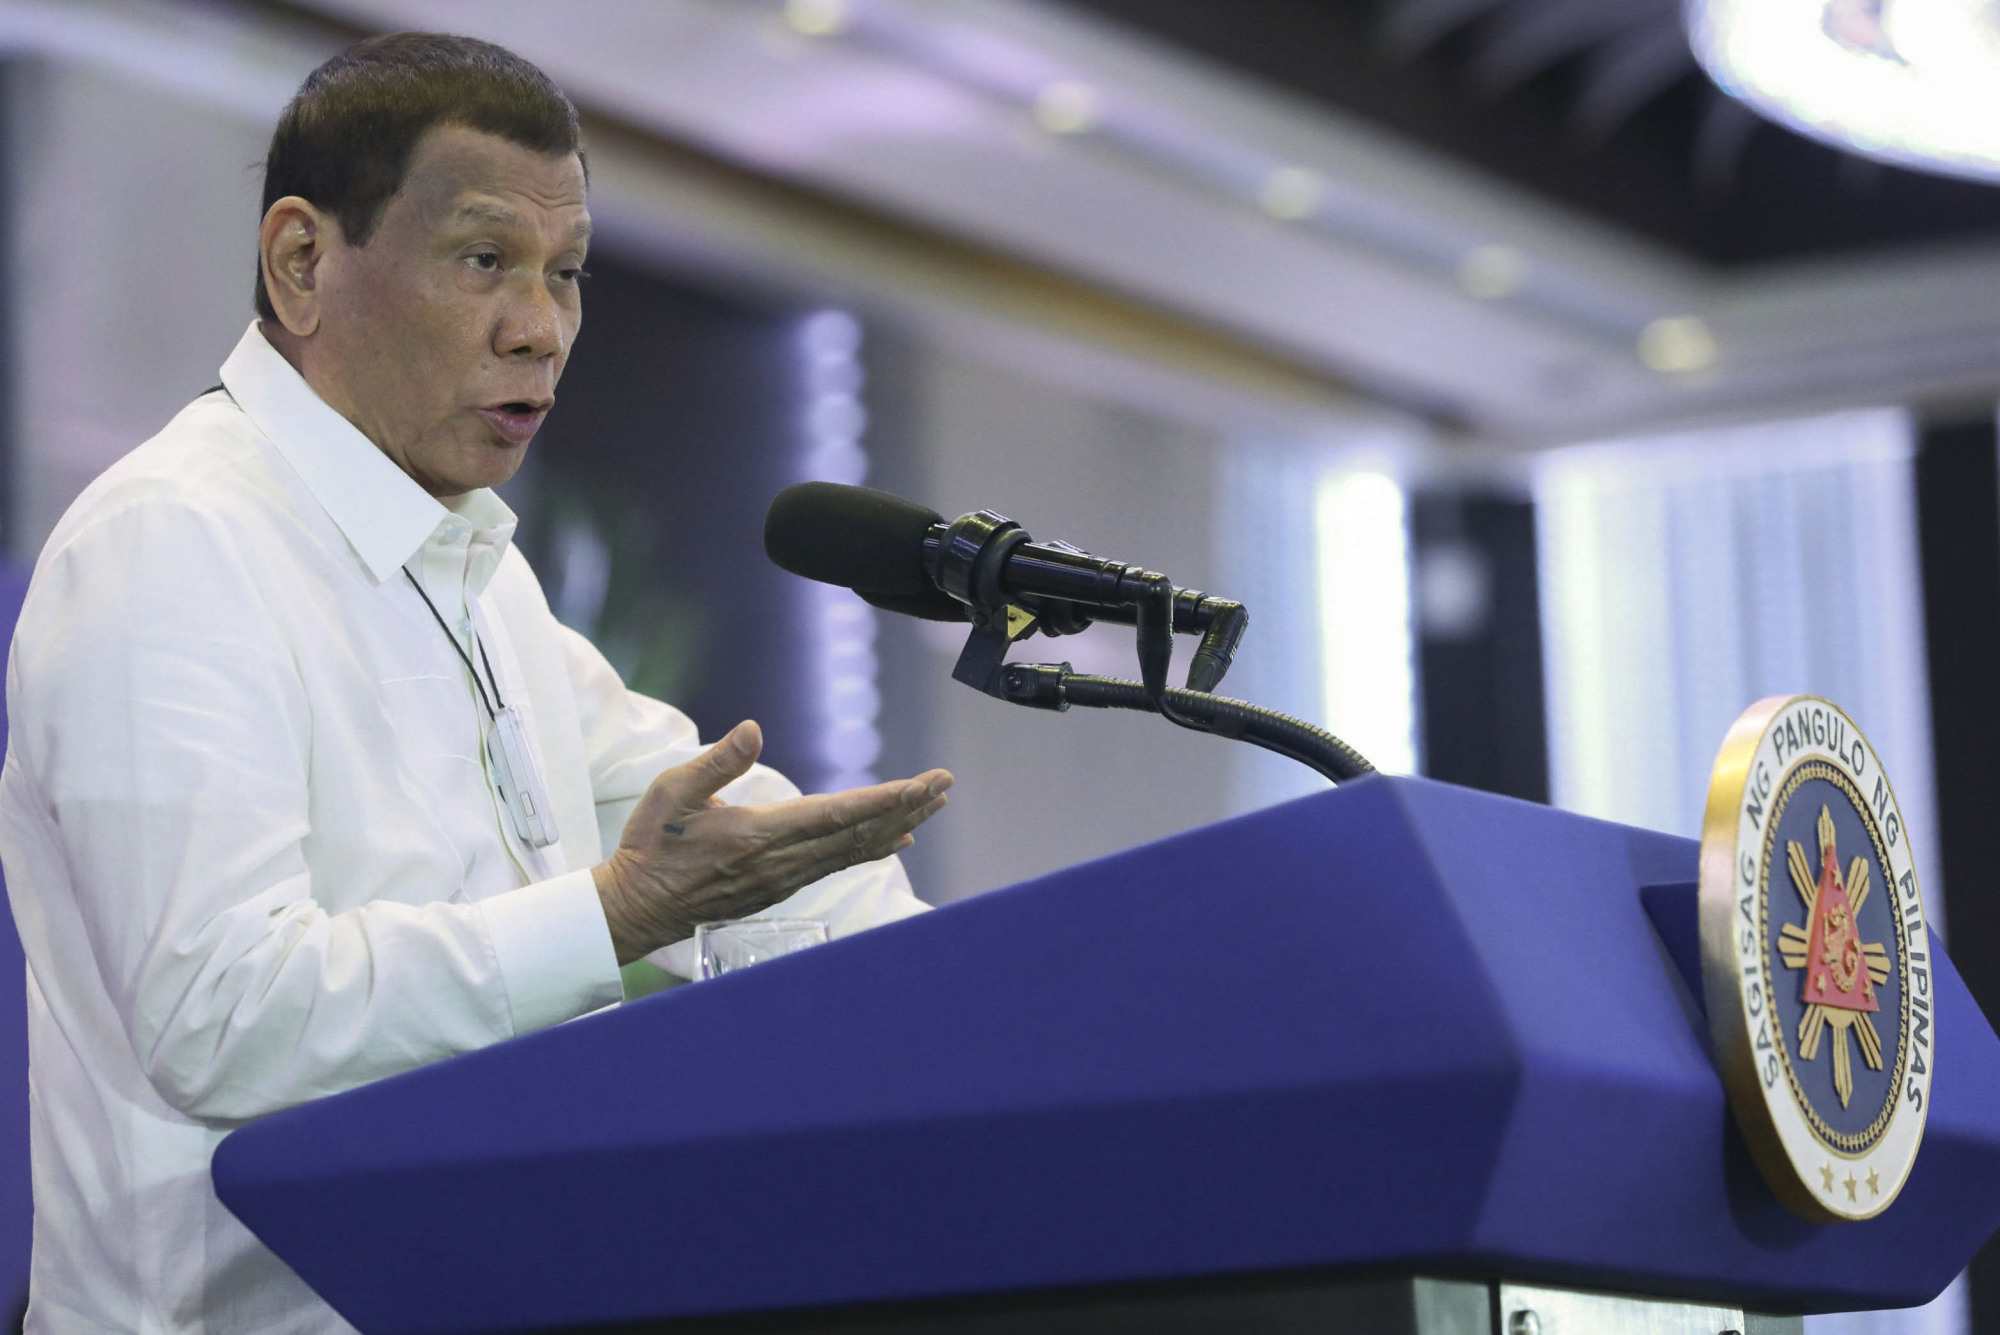 Philippine President Rodrigo Duterte has had rocky relations with the U.S. since taking power. On Tuesday, Manila notified Washington of its intent to terminate a security pact allowing U.S. forces to train in the country. | AP